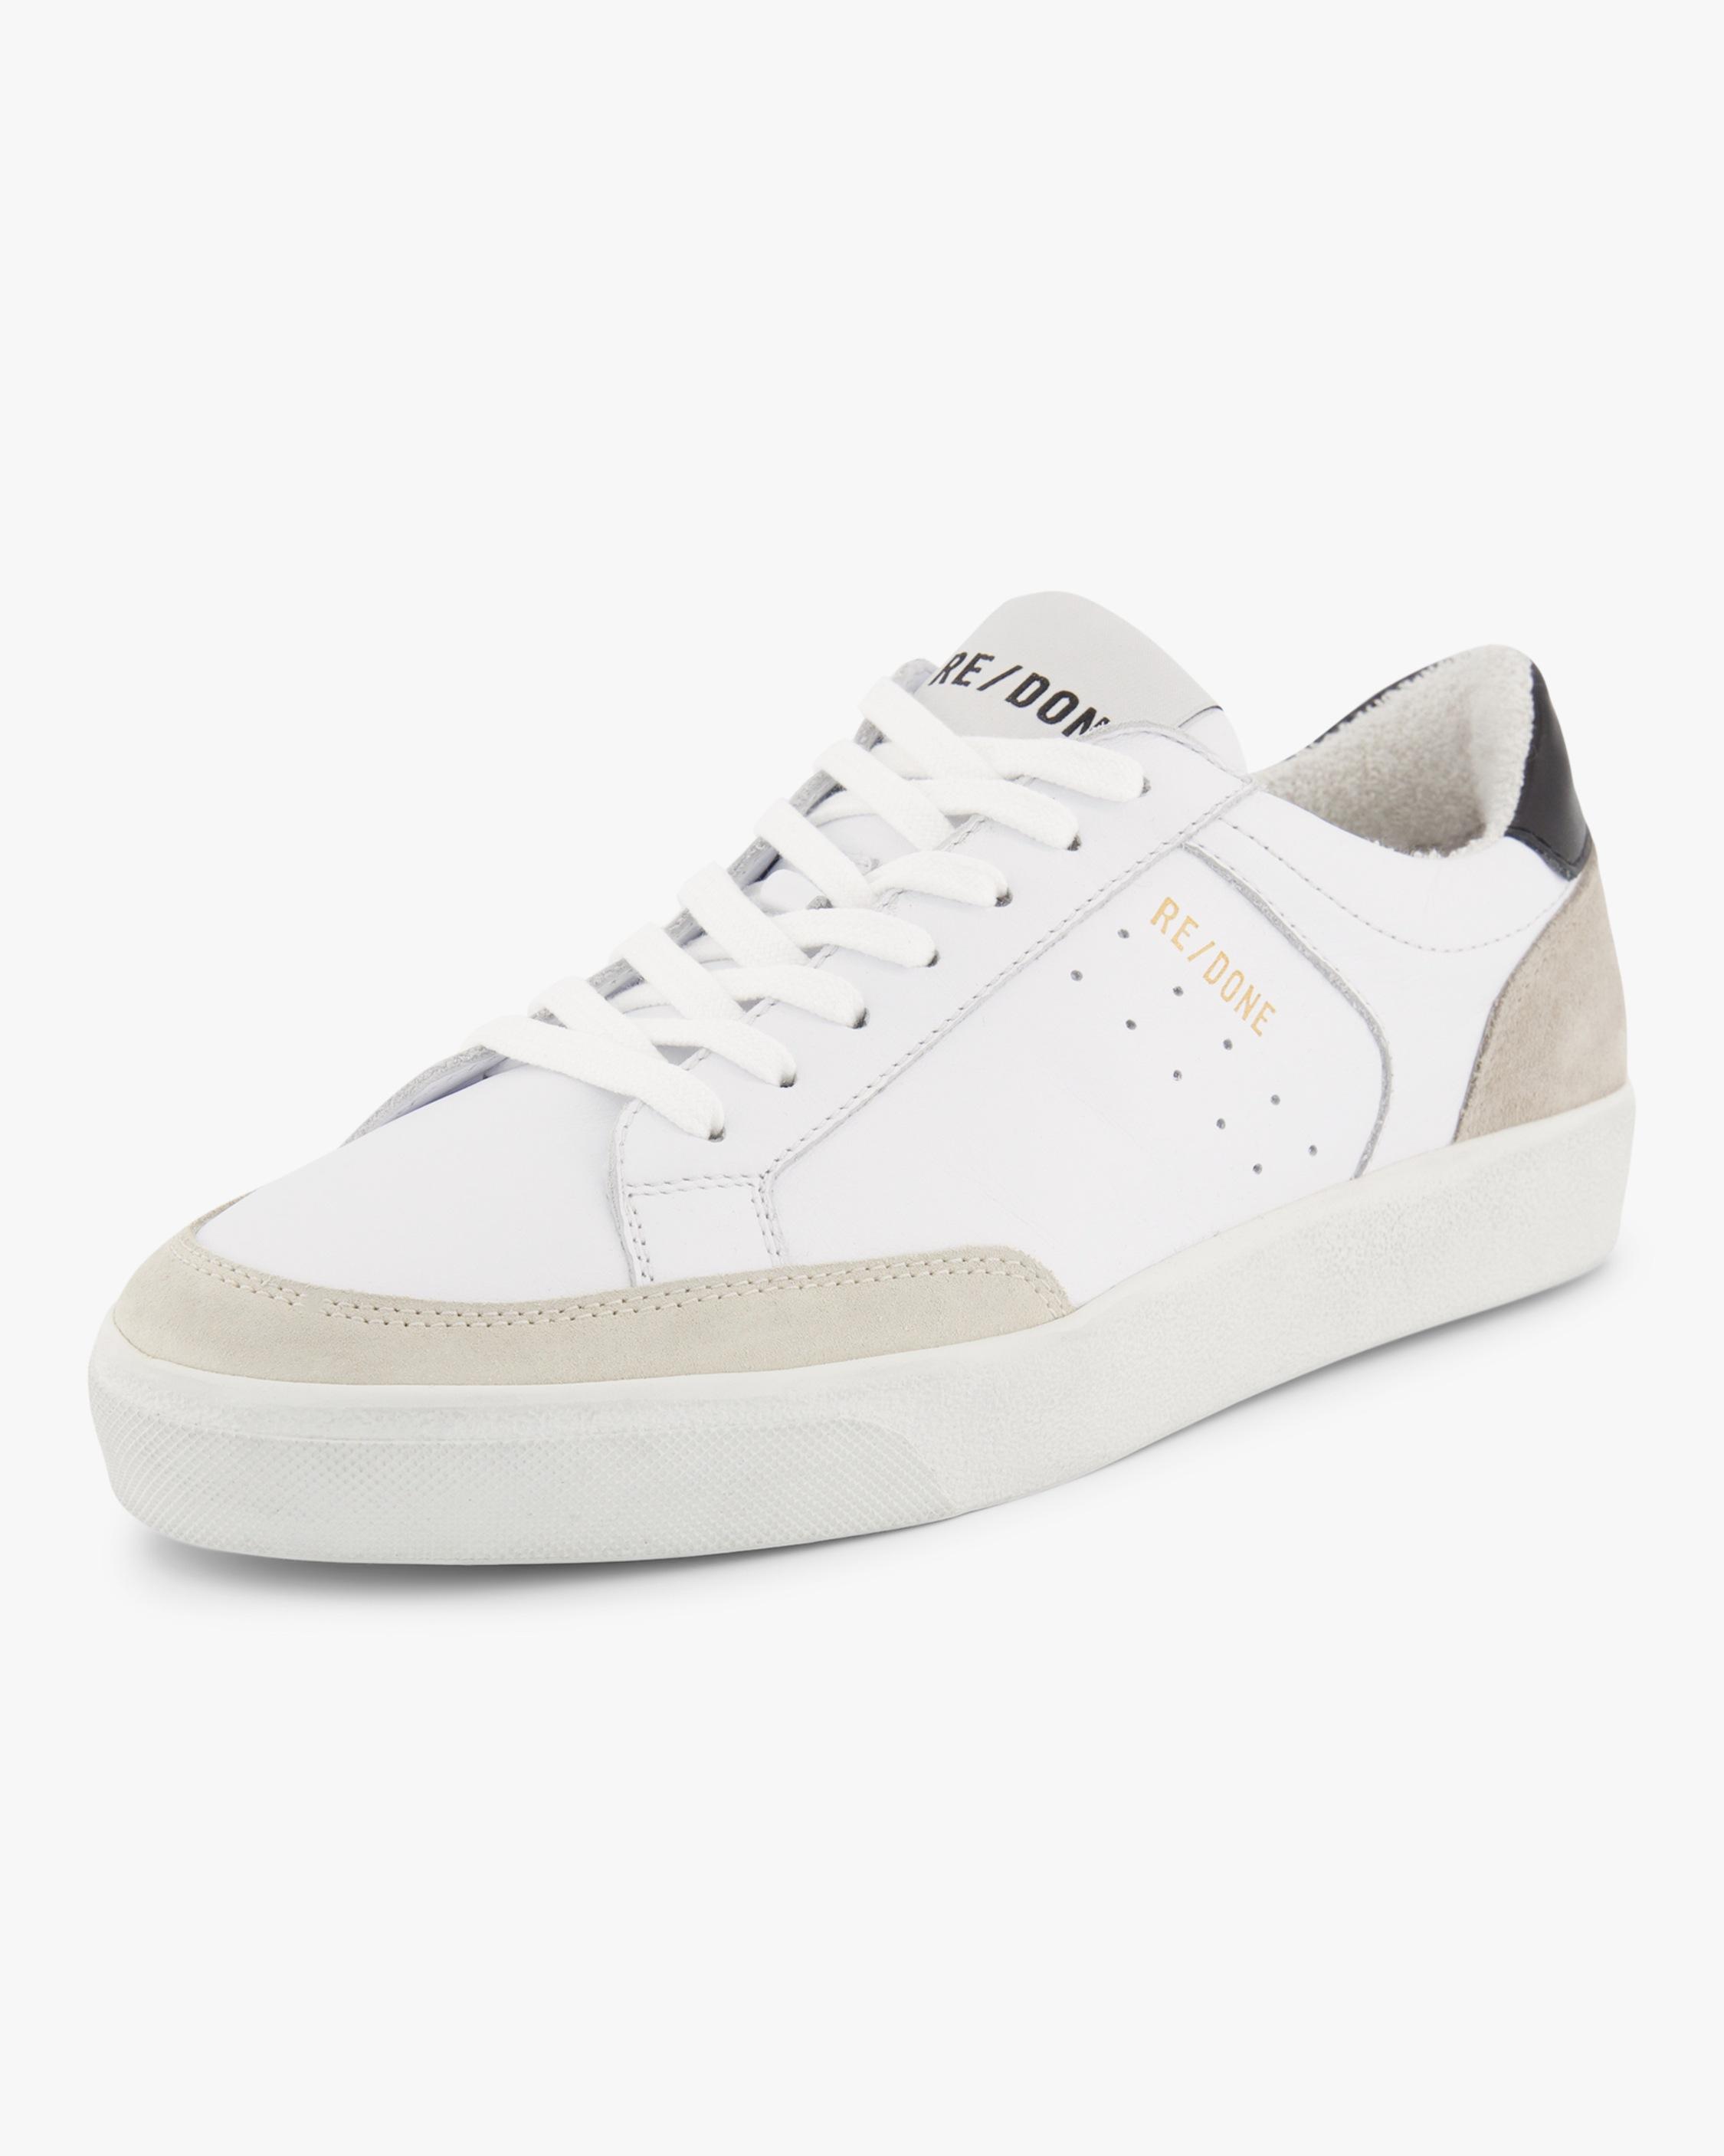 RE/DONE Leather 90s Skate Shoe in White/Marble (White) - Lyst